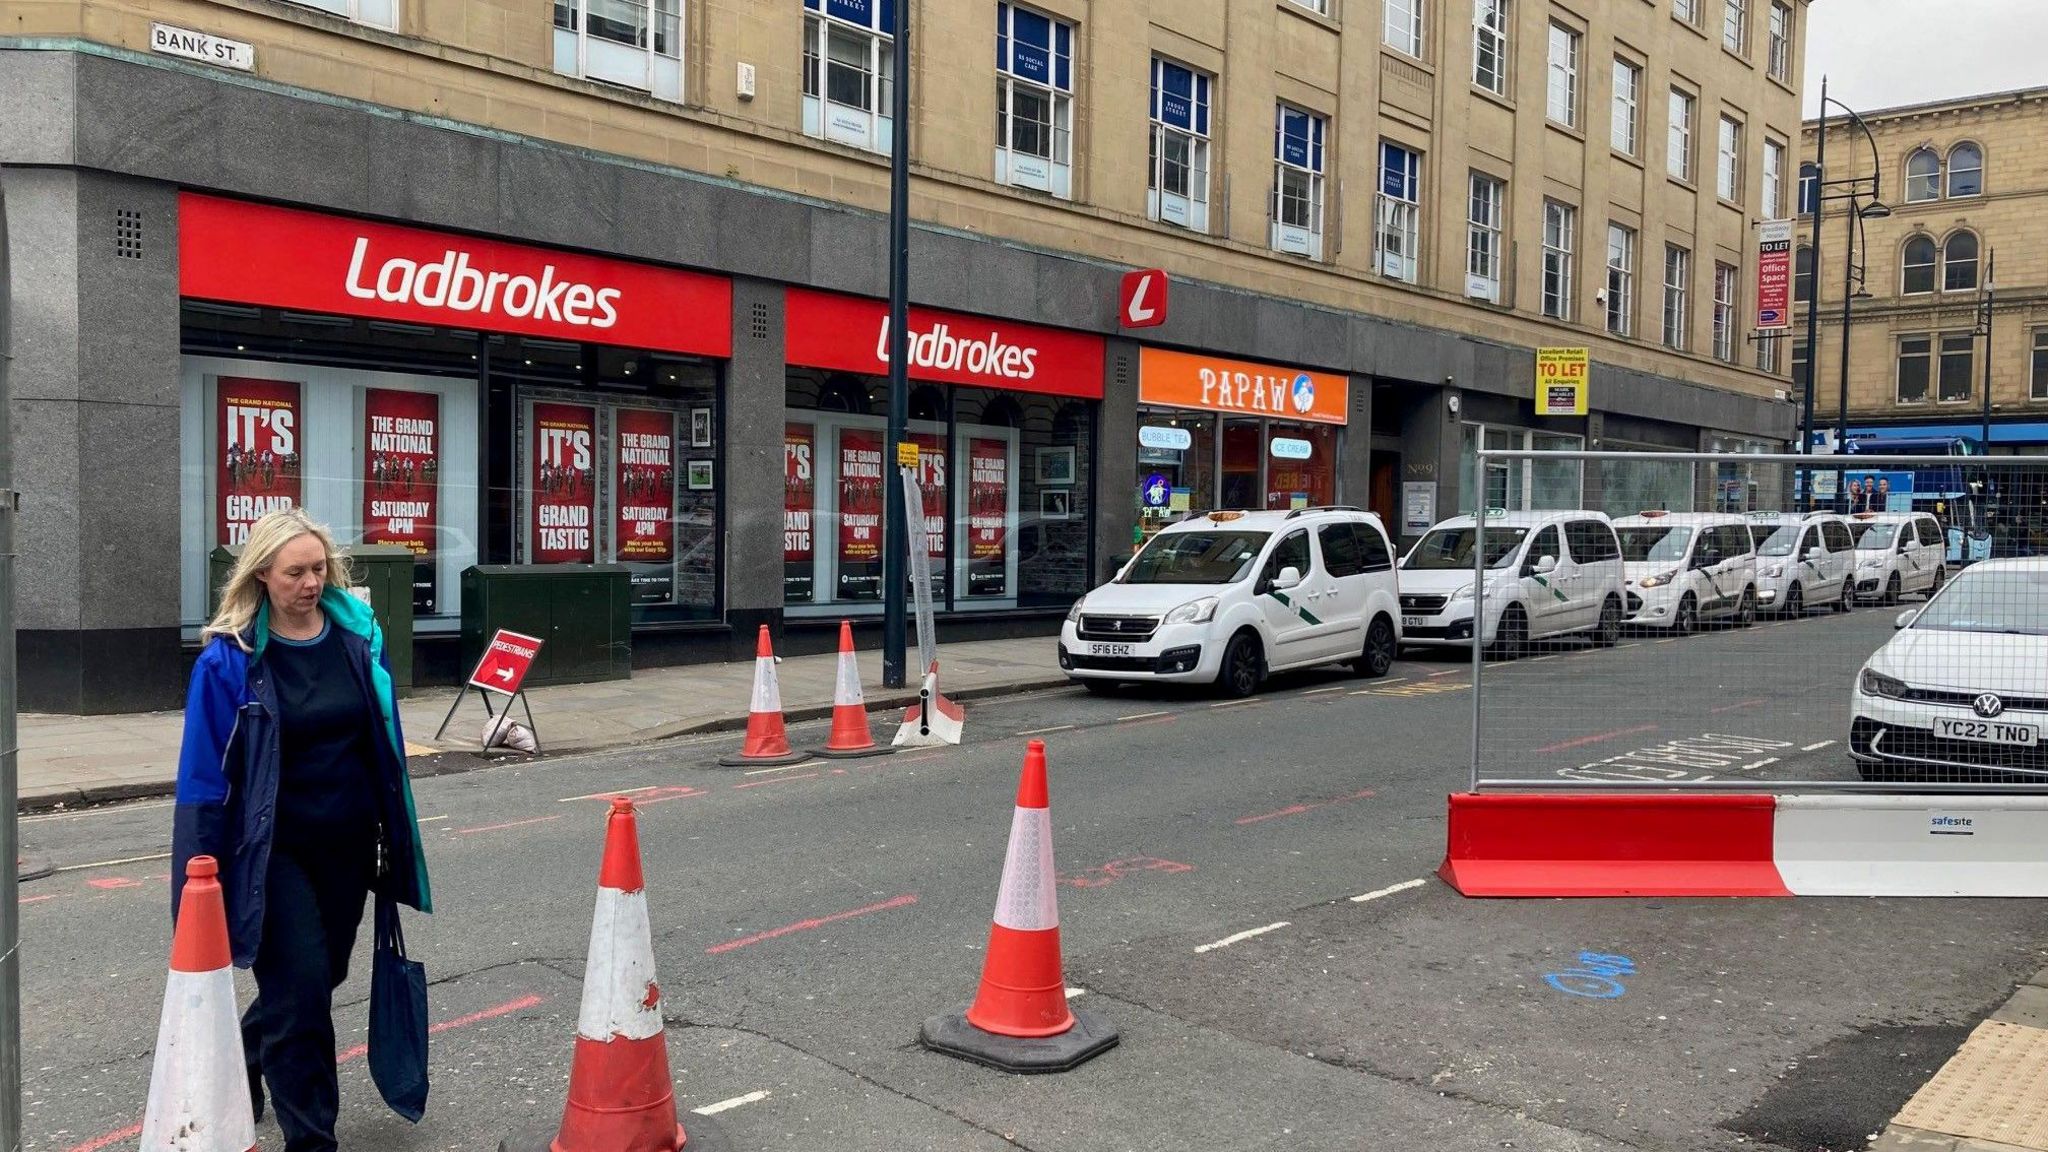 A taxi rank on Bank Street which will close